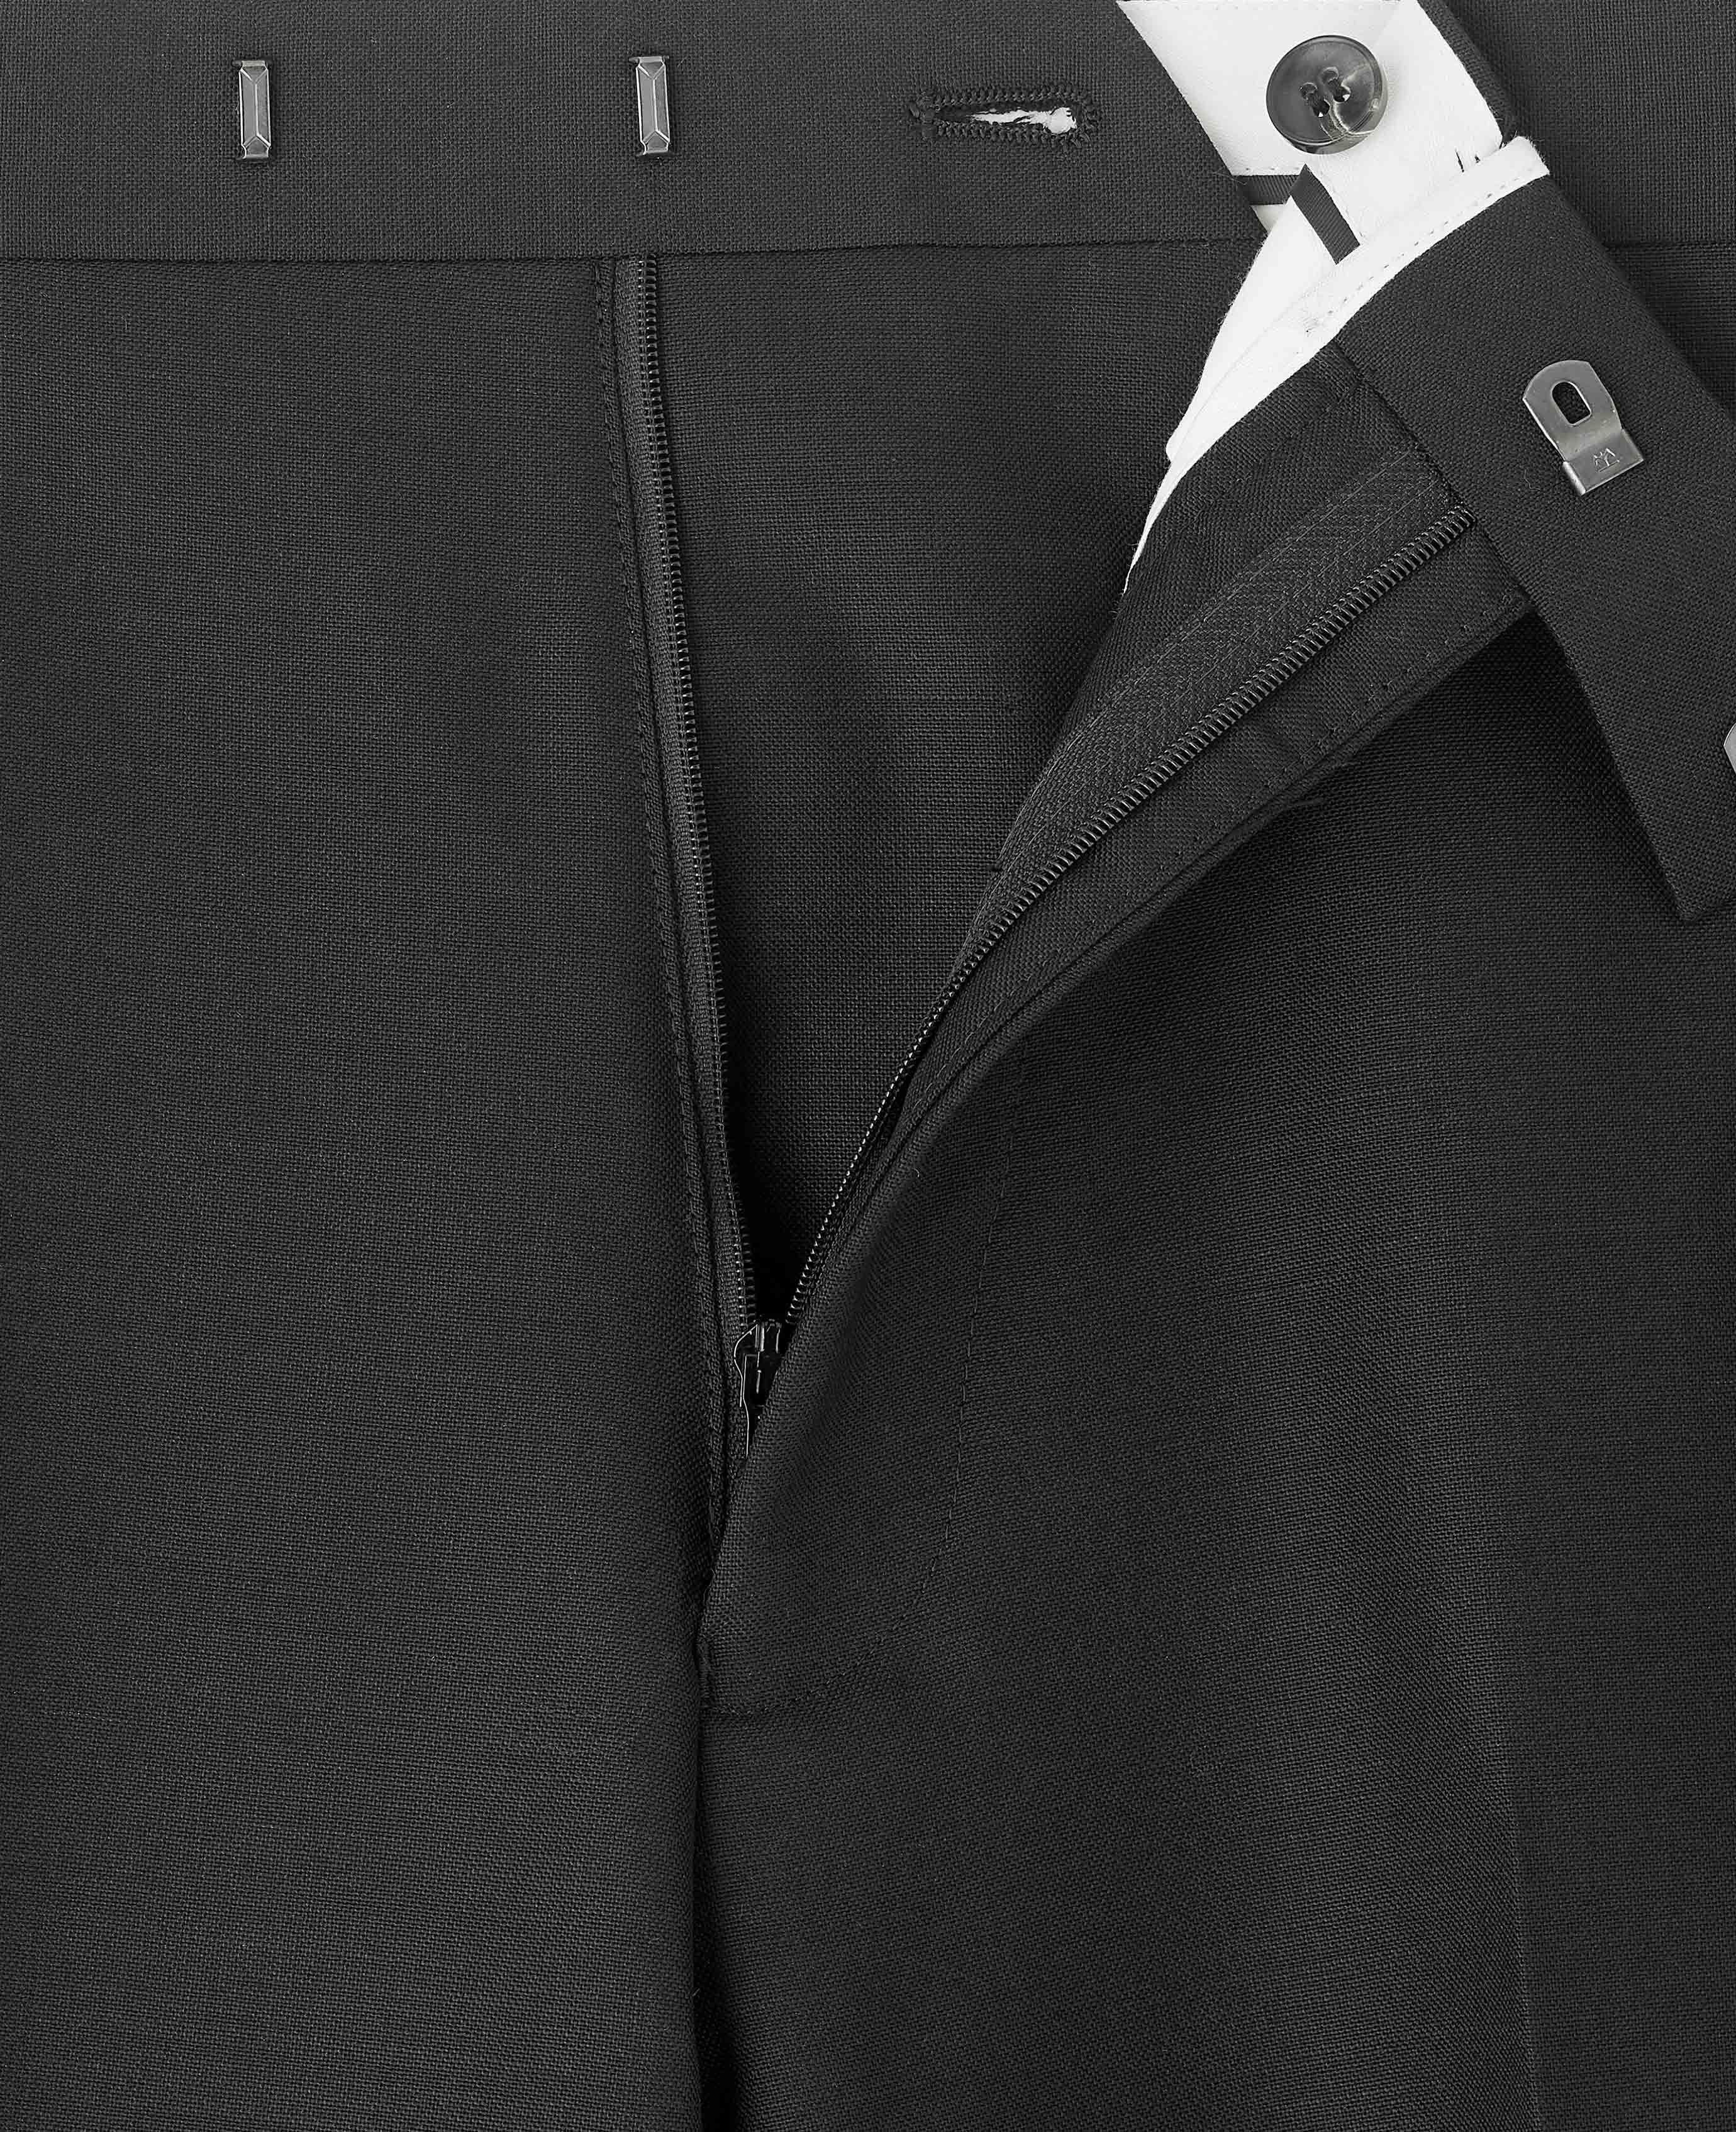 Dinner jacket and trousers Hire Package  Shepherd  Woodward Ltd